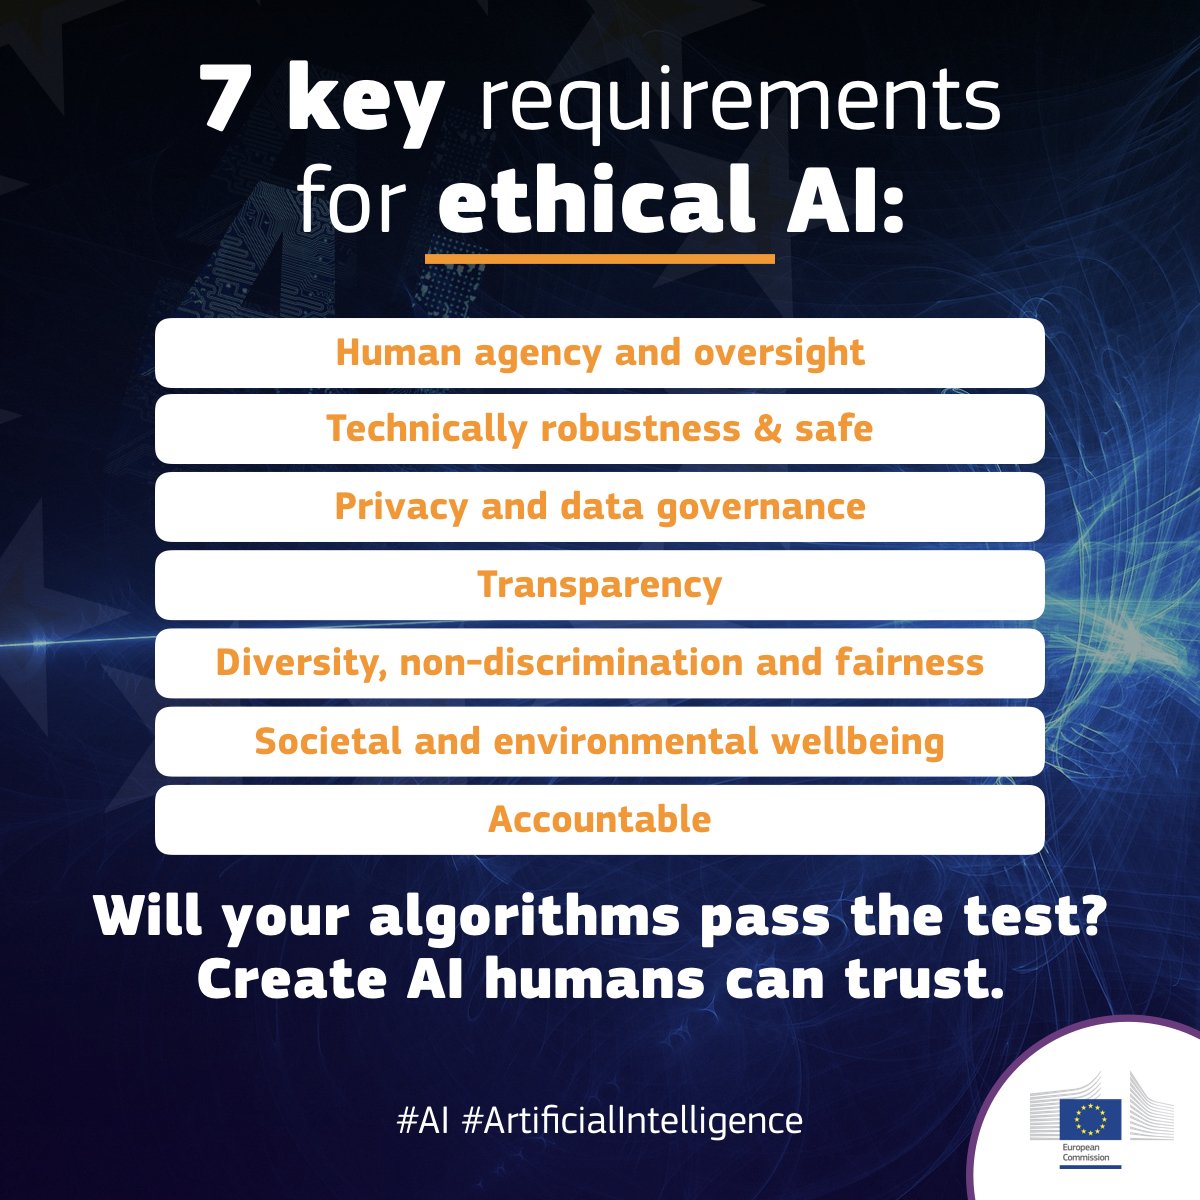 52 independent experts, 500+ comments, 7 essentials to achieve trustworthy #AI These are the new ethics guidelines for #artificialintelligence which companies can start testing this summer 👉europa.eu/!MH69xB